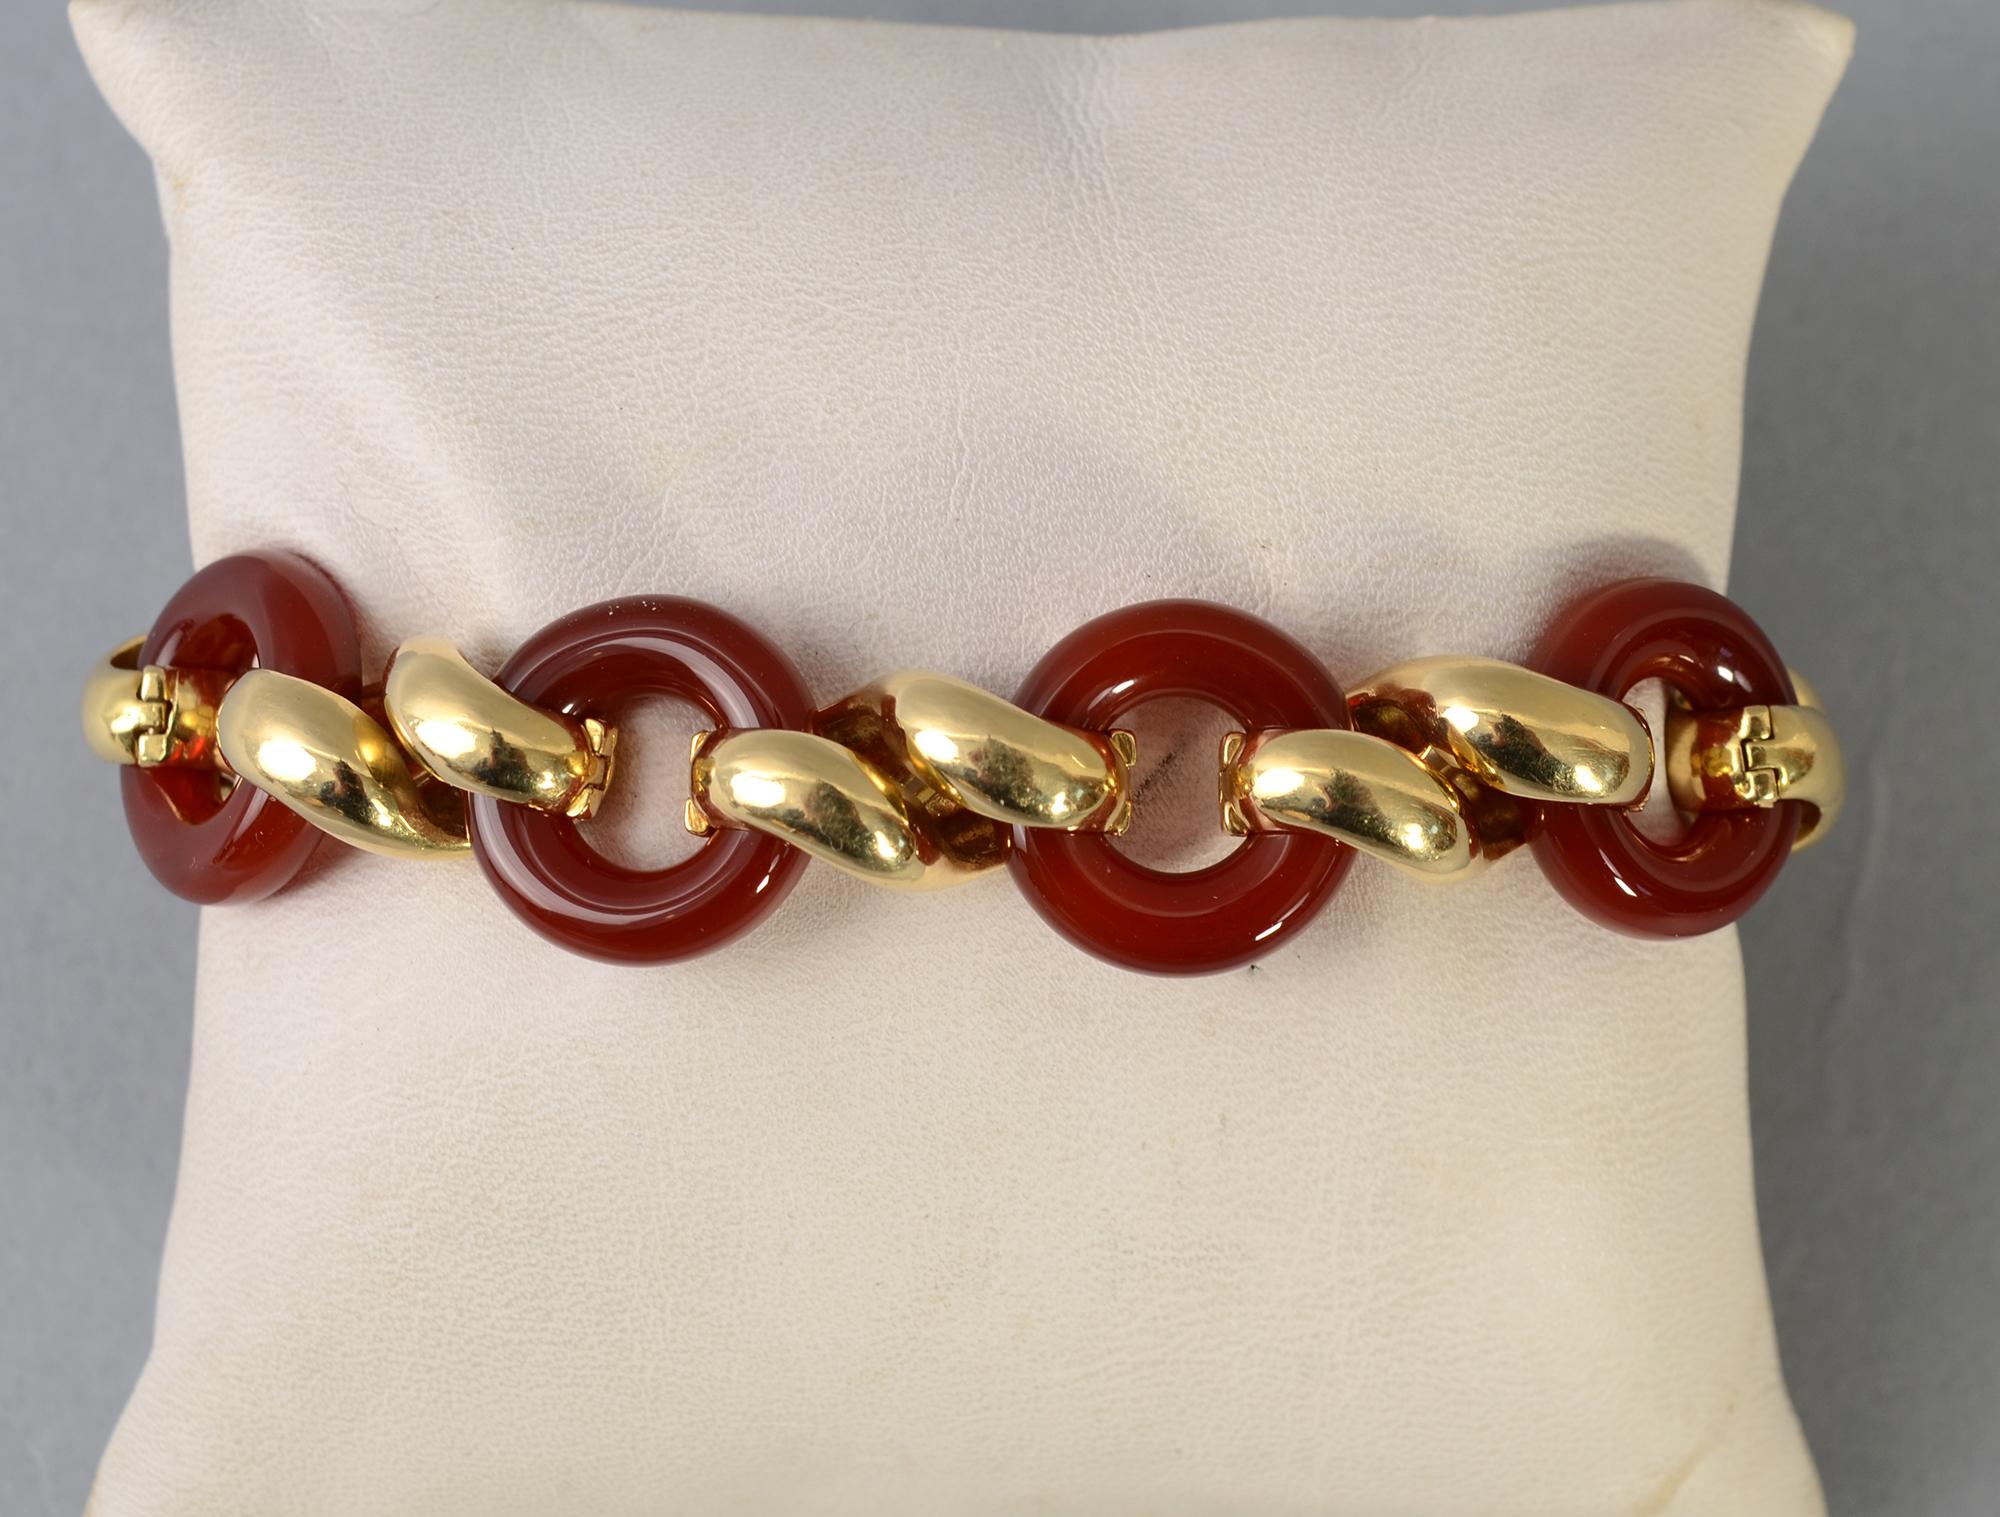 Van Cleef and Arpels  bracelet of 18 karat gold and carnelian. Gold figure eight links alternate with open circles of carnelian.  The clasp is beautifully incorporated into one of the gold links. Were it not for the safety catch, it would be